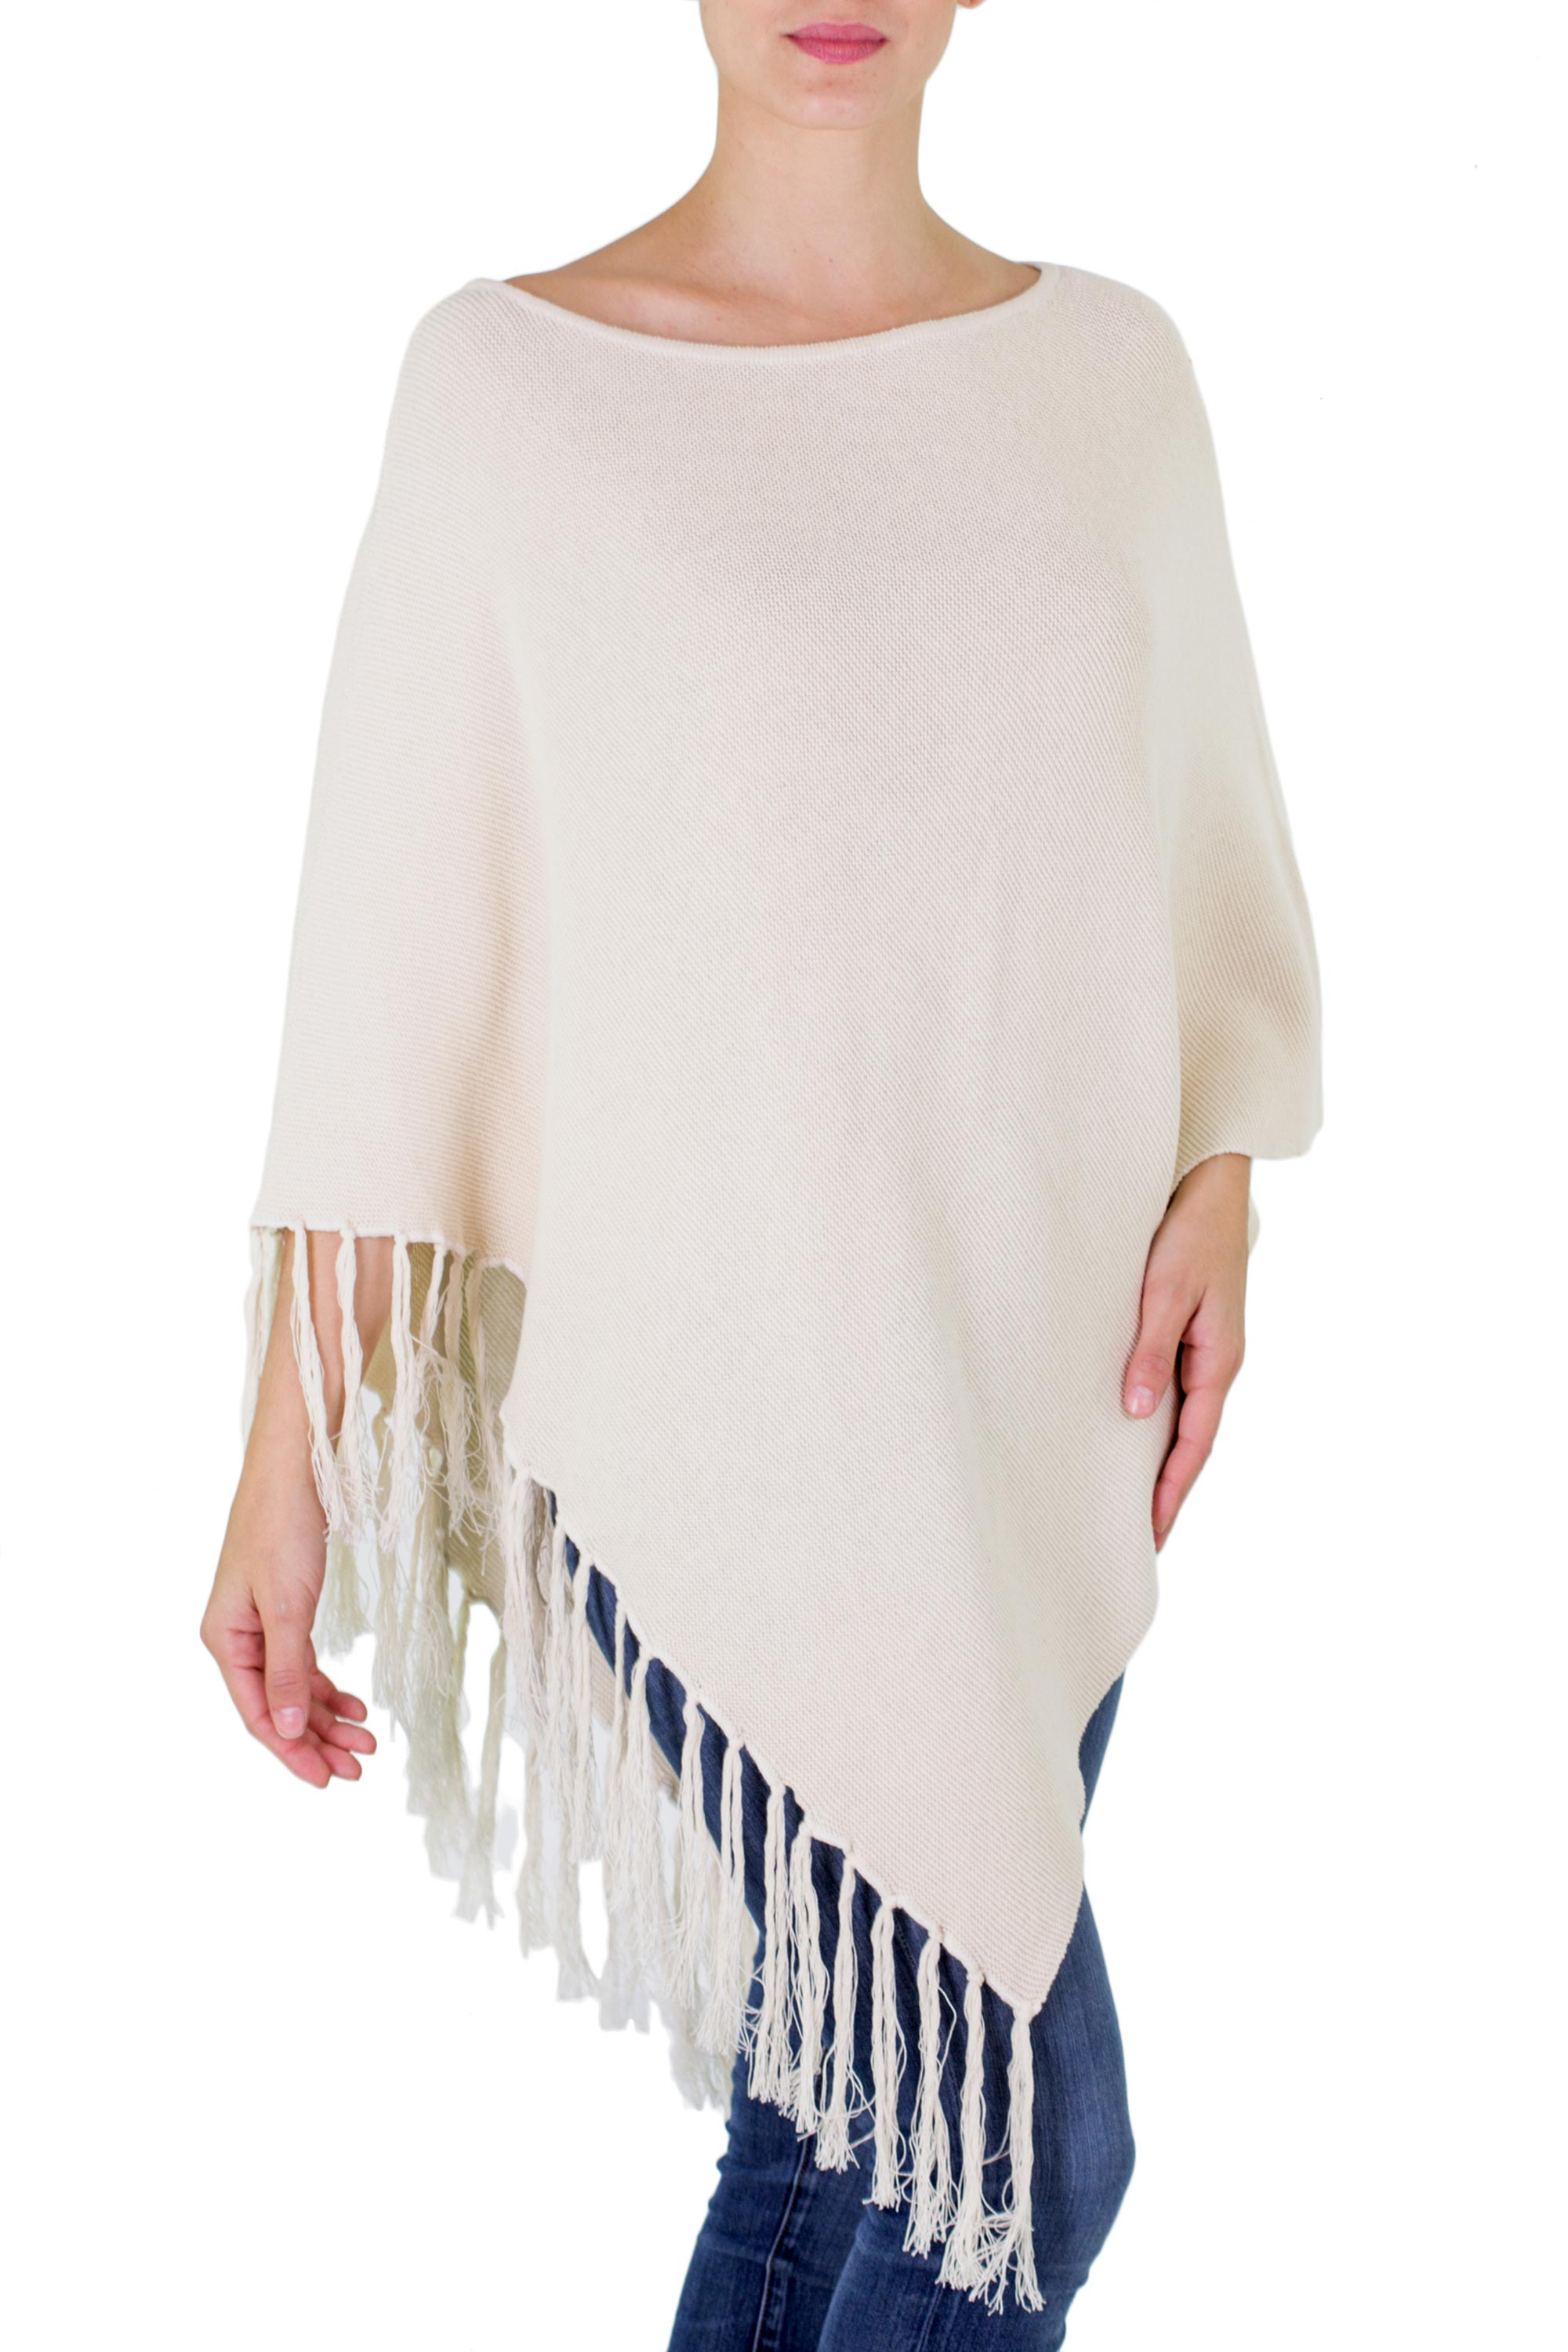 Cotton Poncho with Fringe Ivory Color from Guatemala - Spontaneous ...